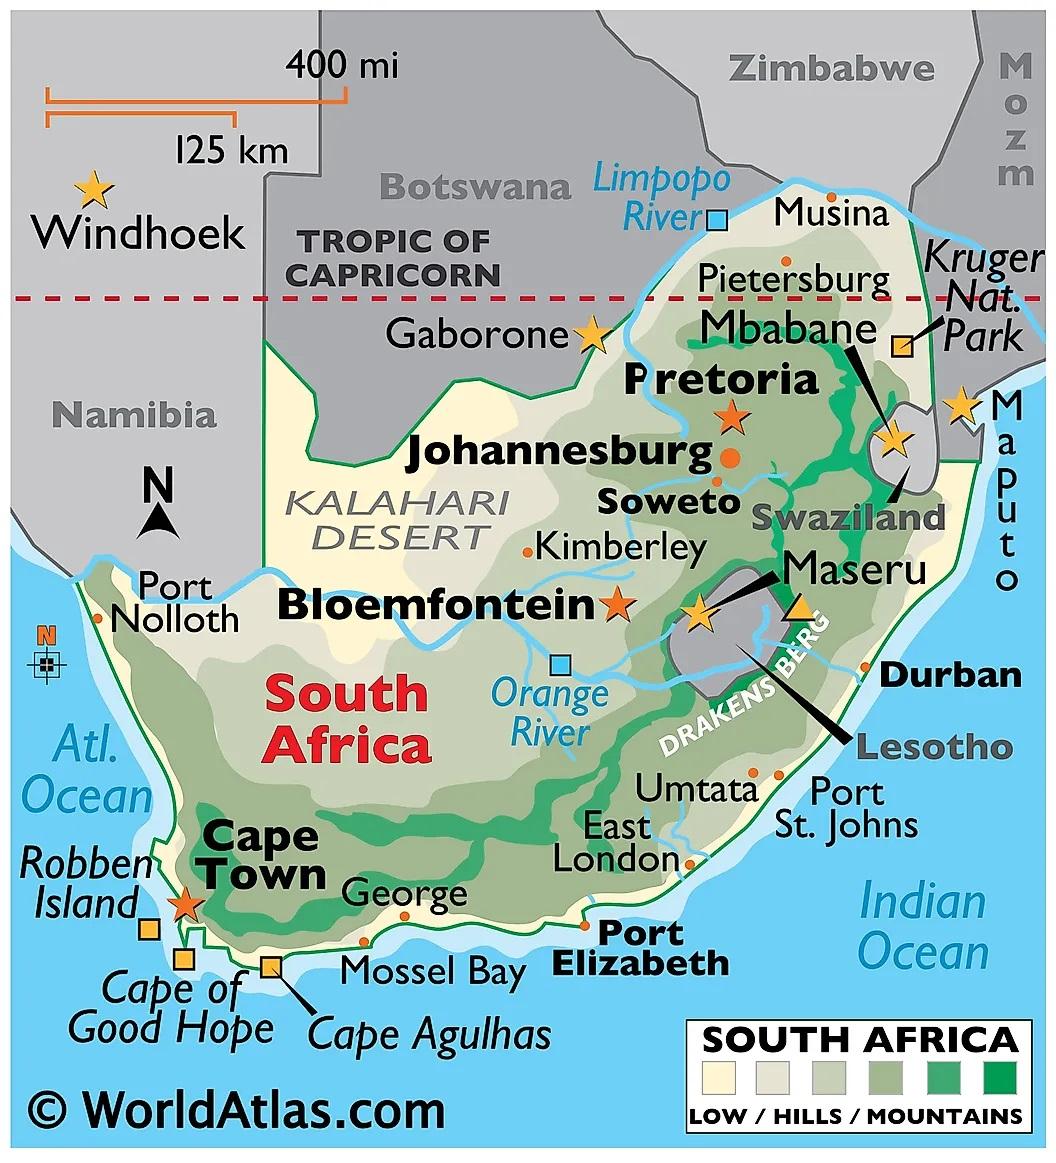 A map of South Africa